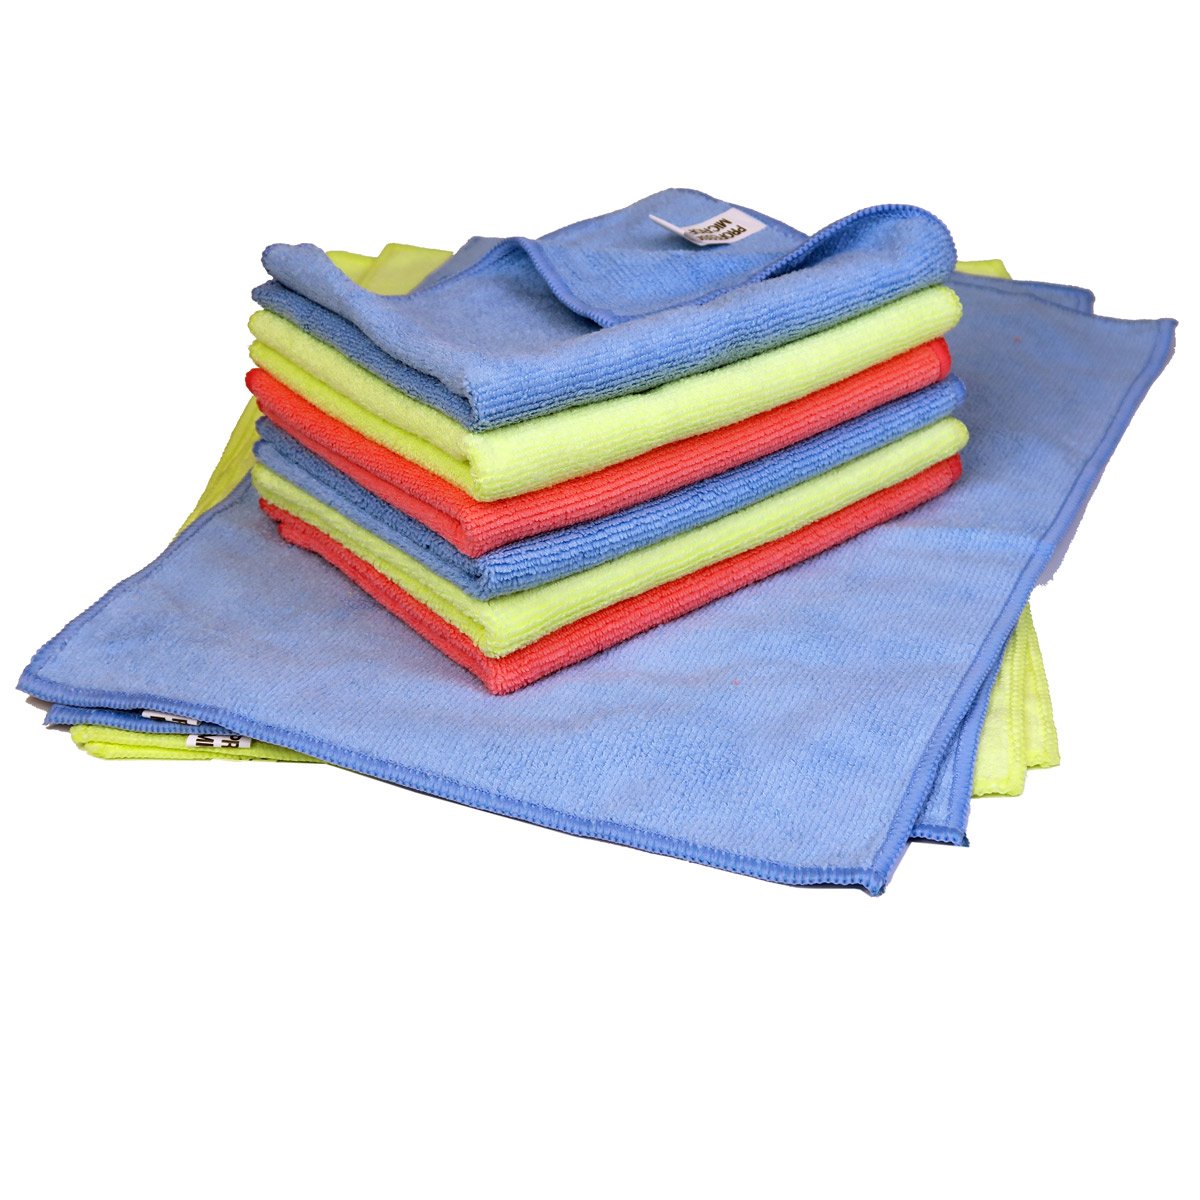 Microfibre Cleaning & Drying Towel 30cms x 40cms - 30 pack